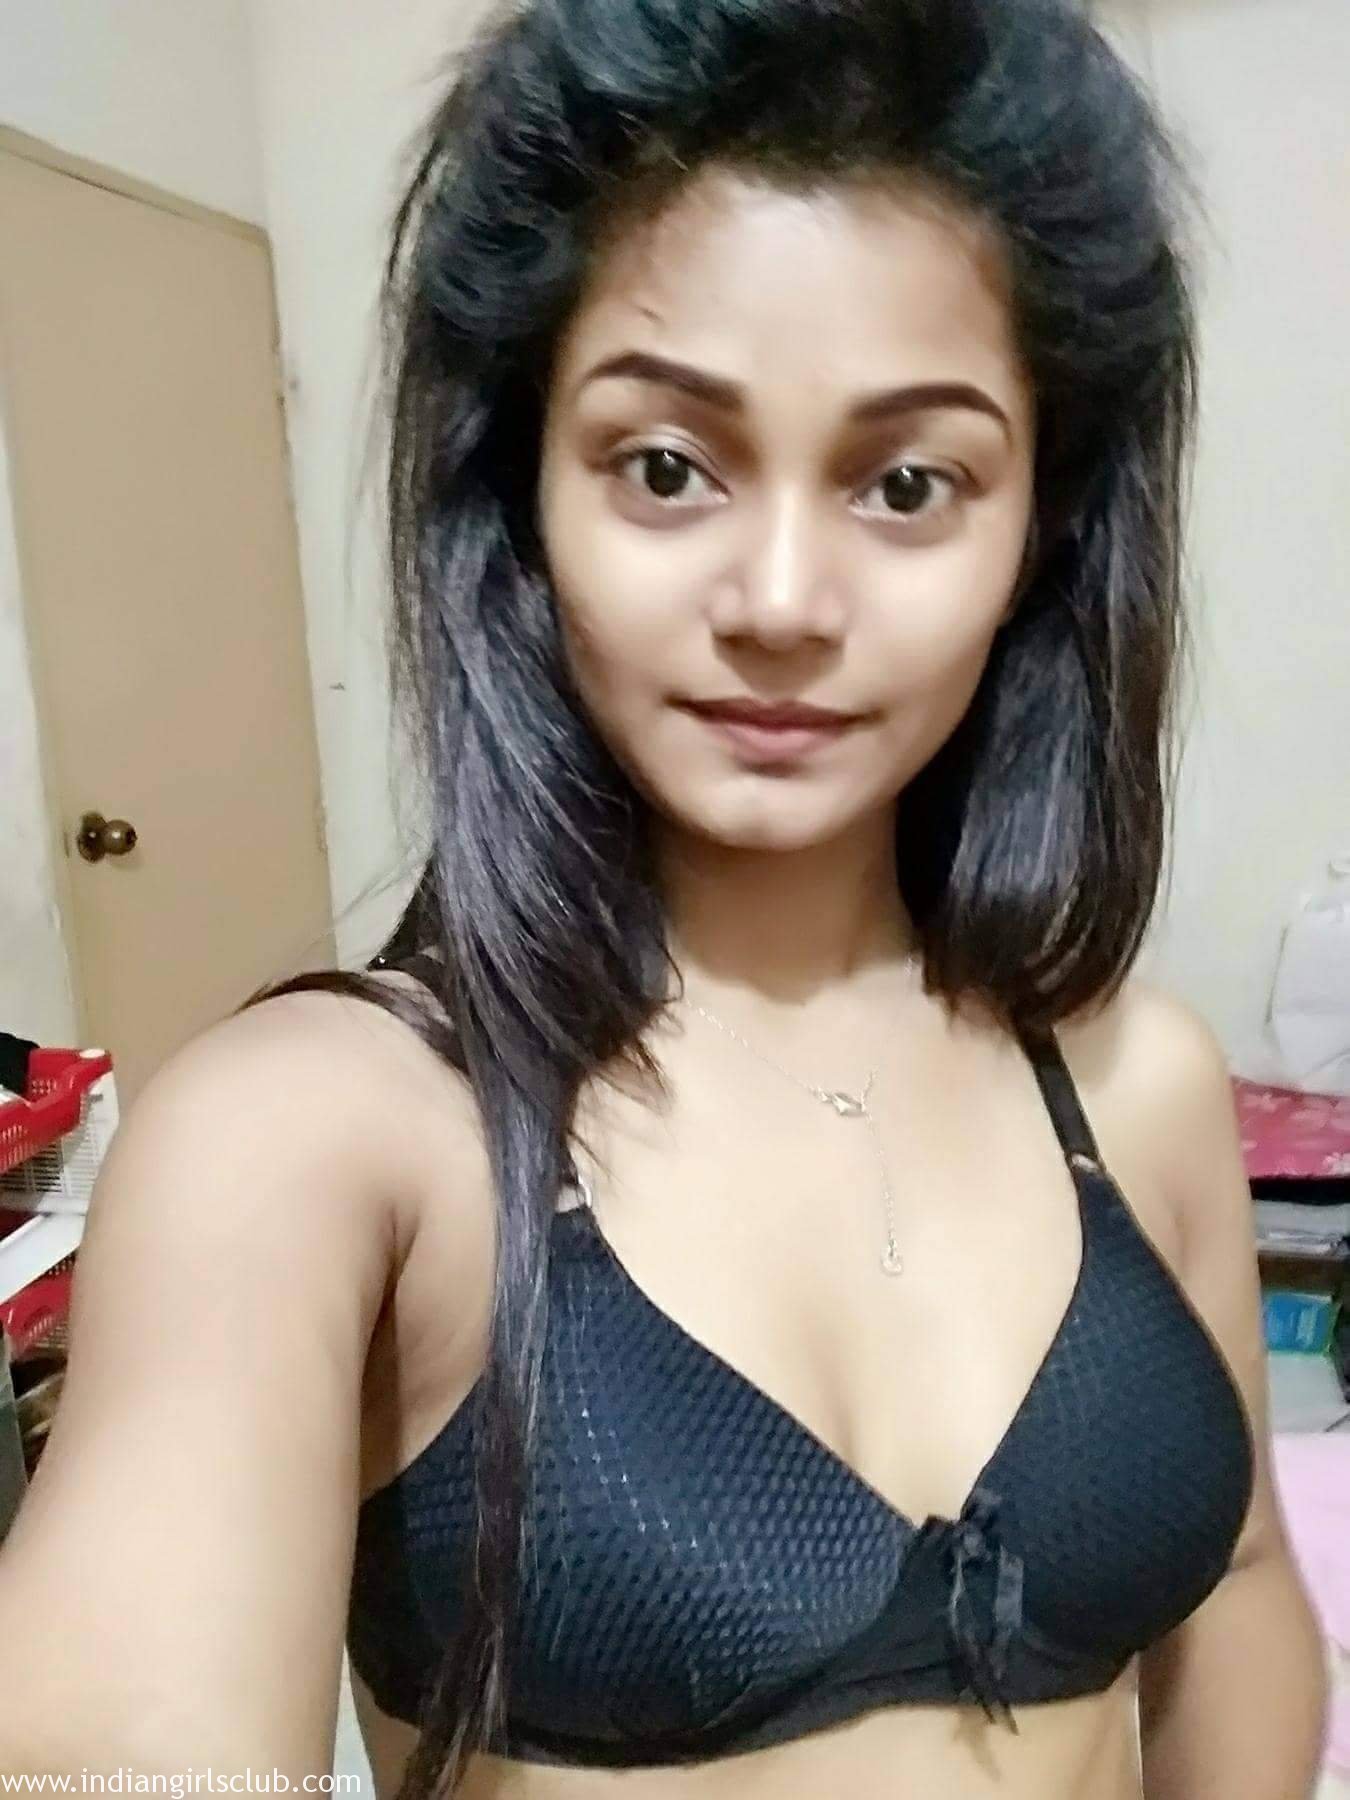 Bra Sex Indian College - Indian College Girl Hot Sex With Her Lover - Indian Girls Club